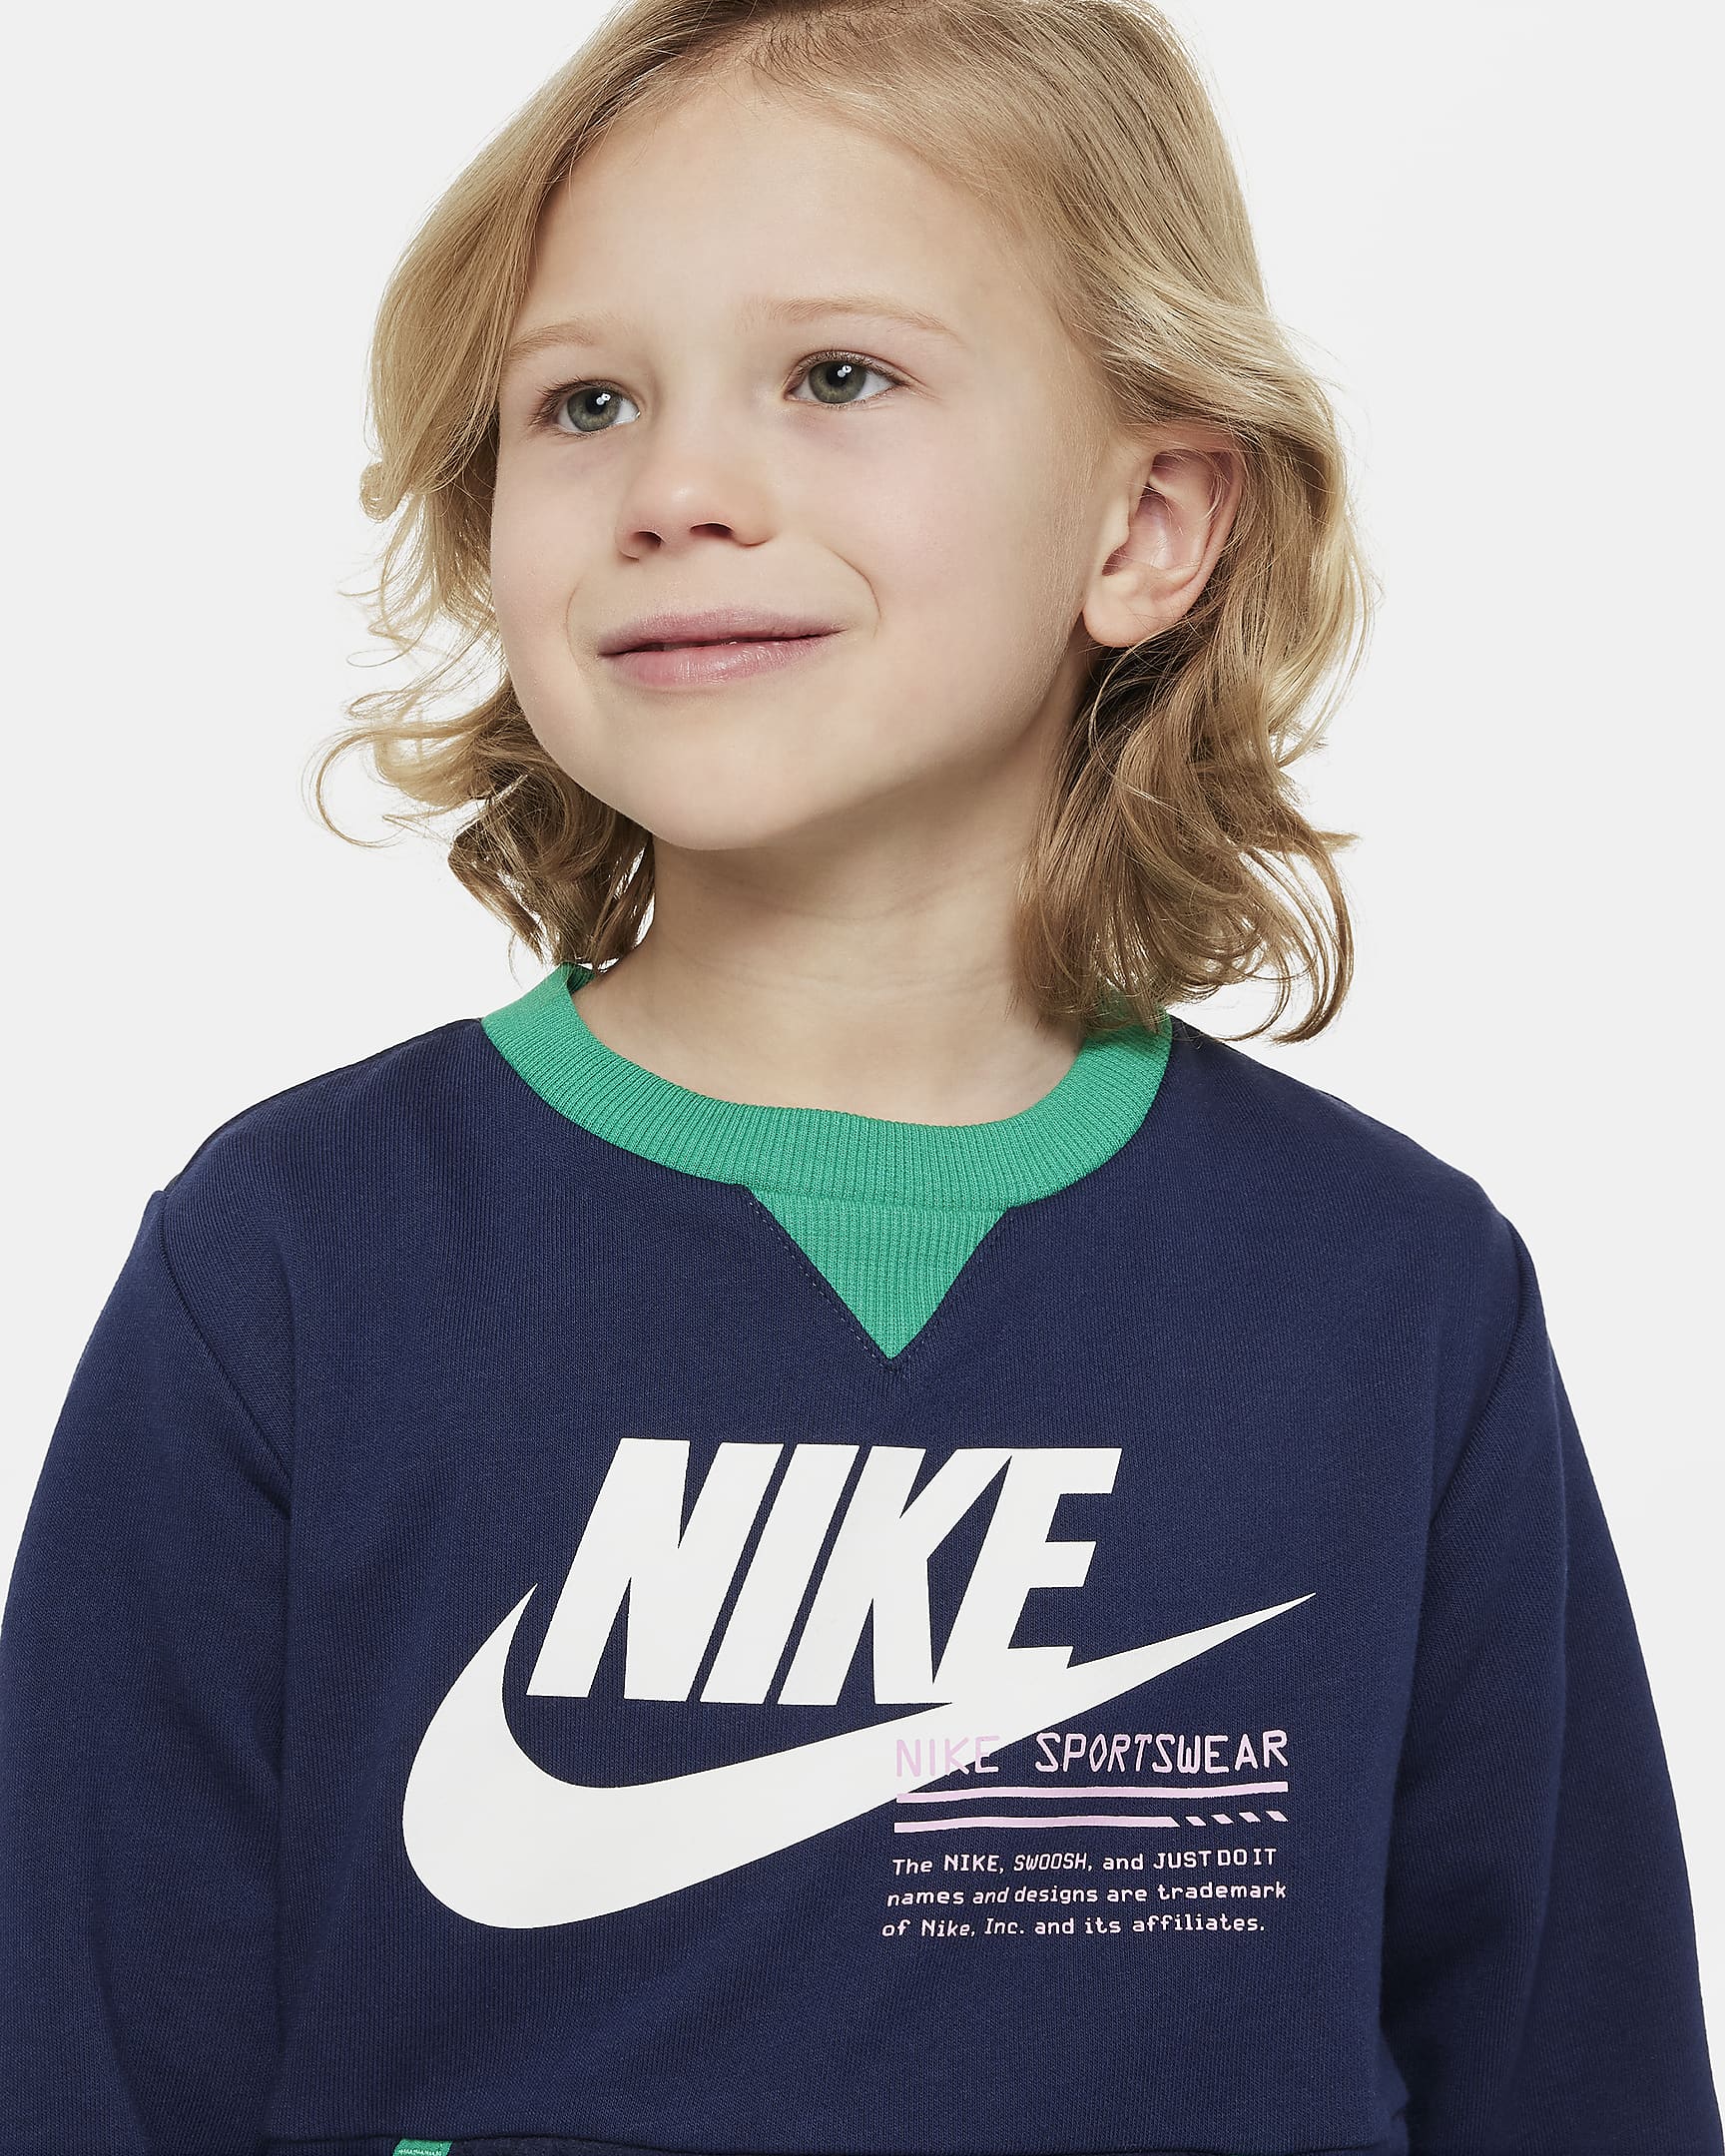 Nike Sportswear Paint Your Future Little Kids' French Terry Crew. Nike.com